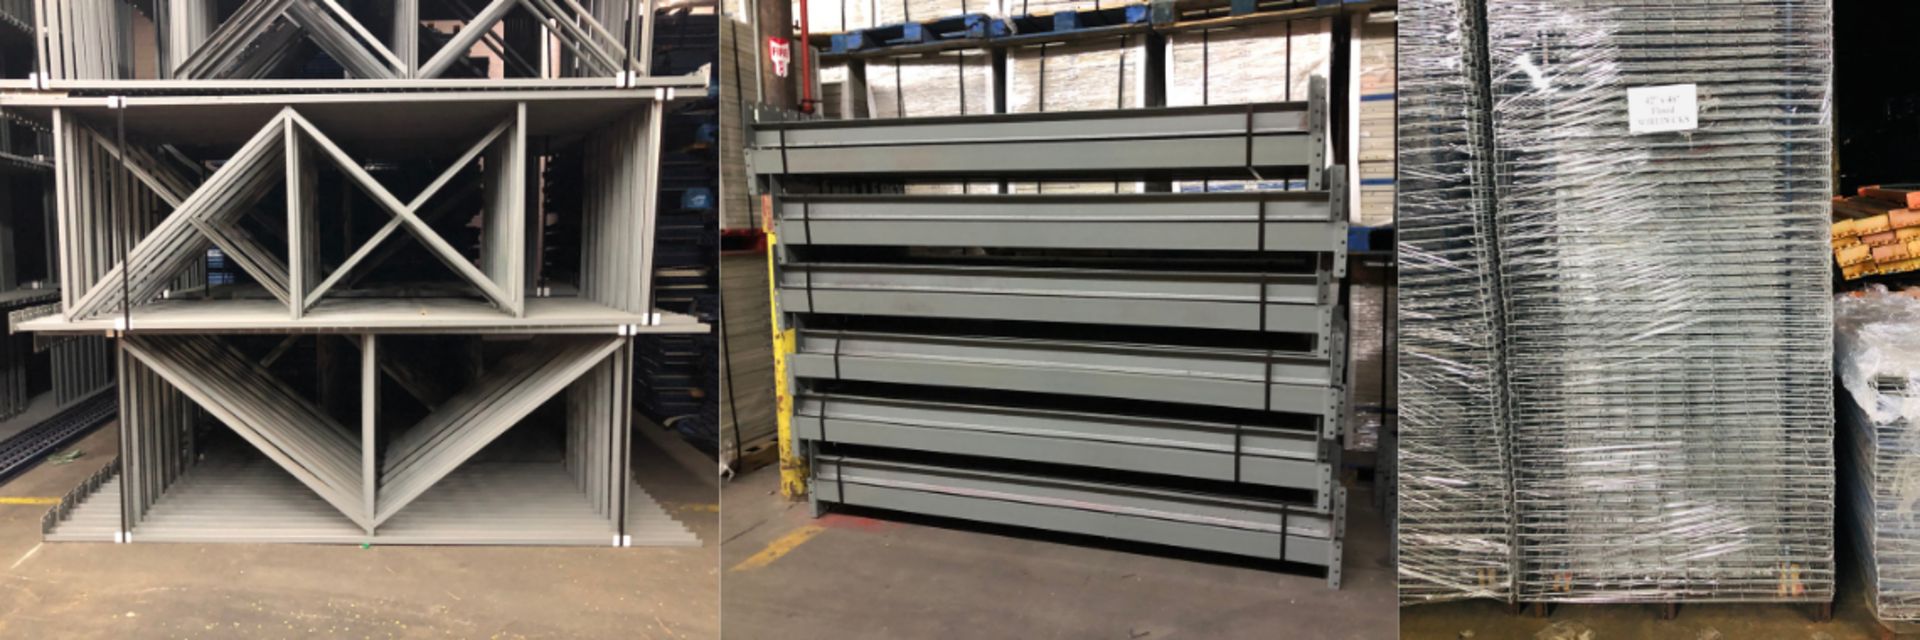 14 BAYS OF 10.5'H X 42"D X 93"L STRUCTURAL STYLE PALLET RACKS - Image 3 of 5